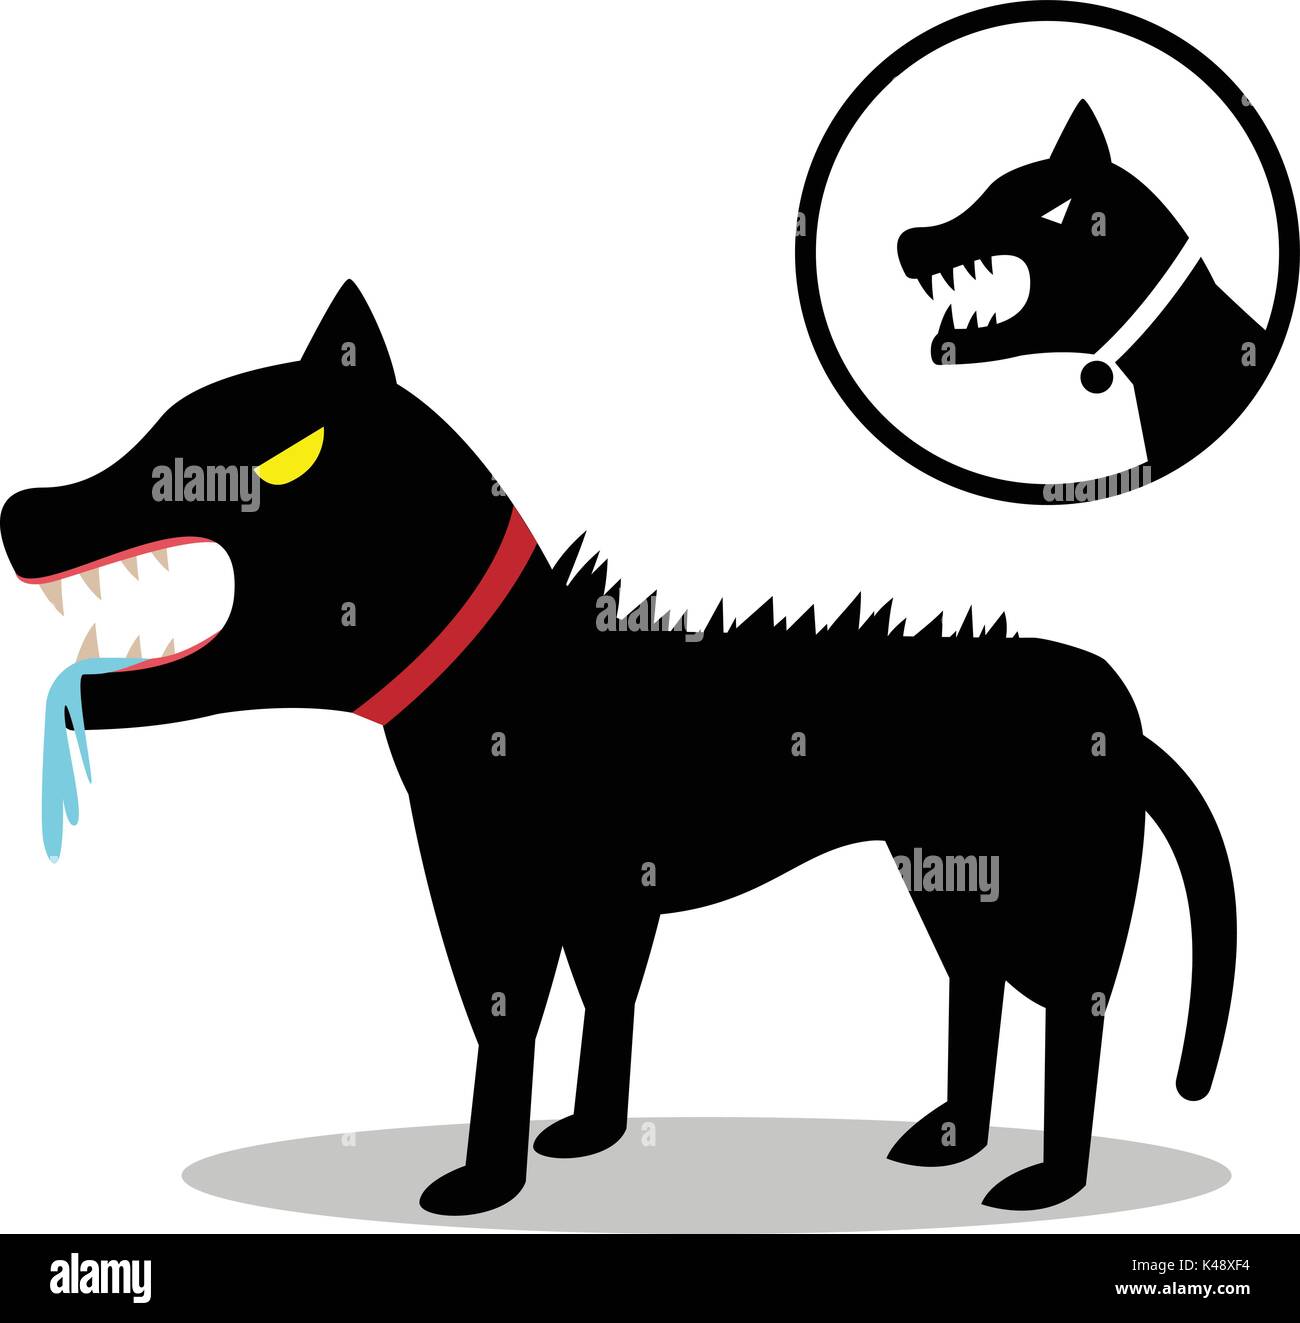 Rabid dog in flat style and icon, vector design Stock Vector